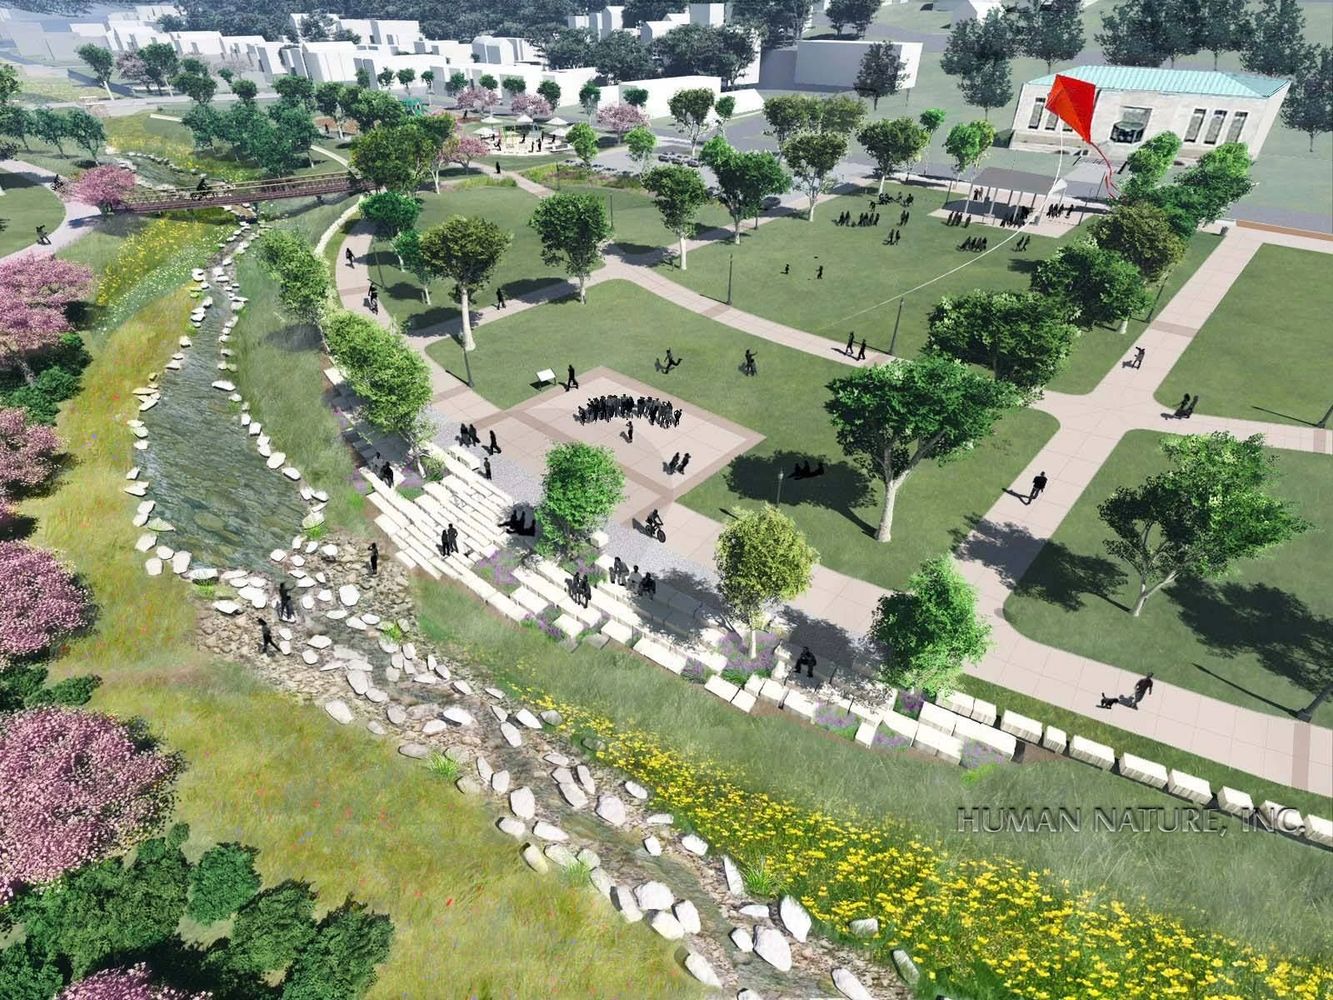 Artist's Rendering of what the Lick Run Greenway will look like. It's now done. Doesn't the plan loo